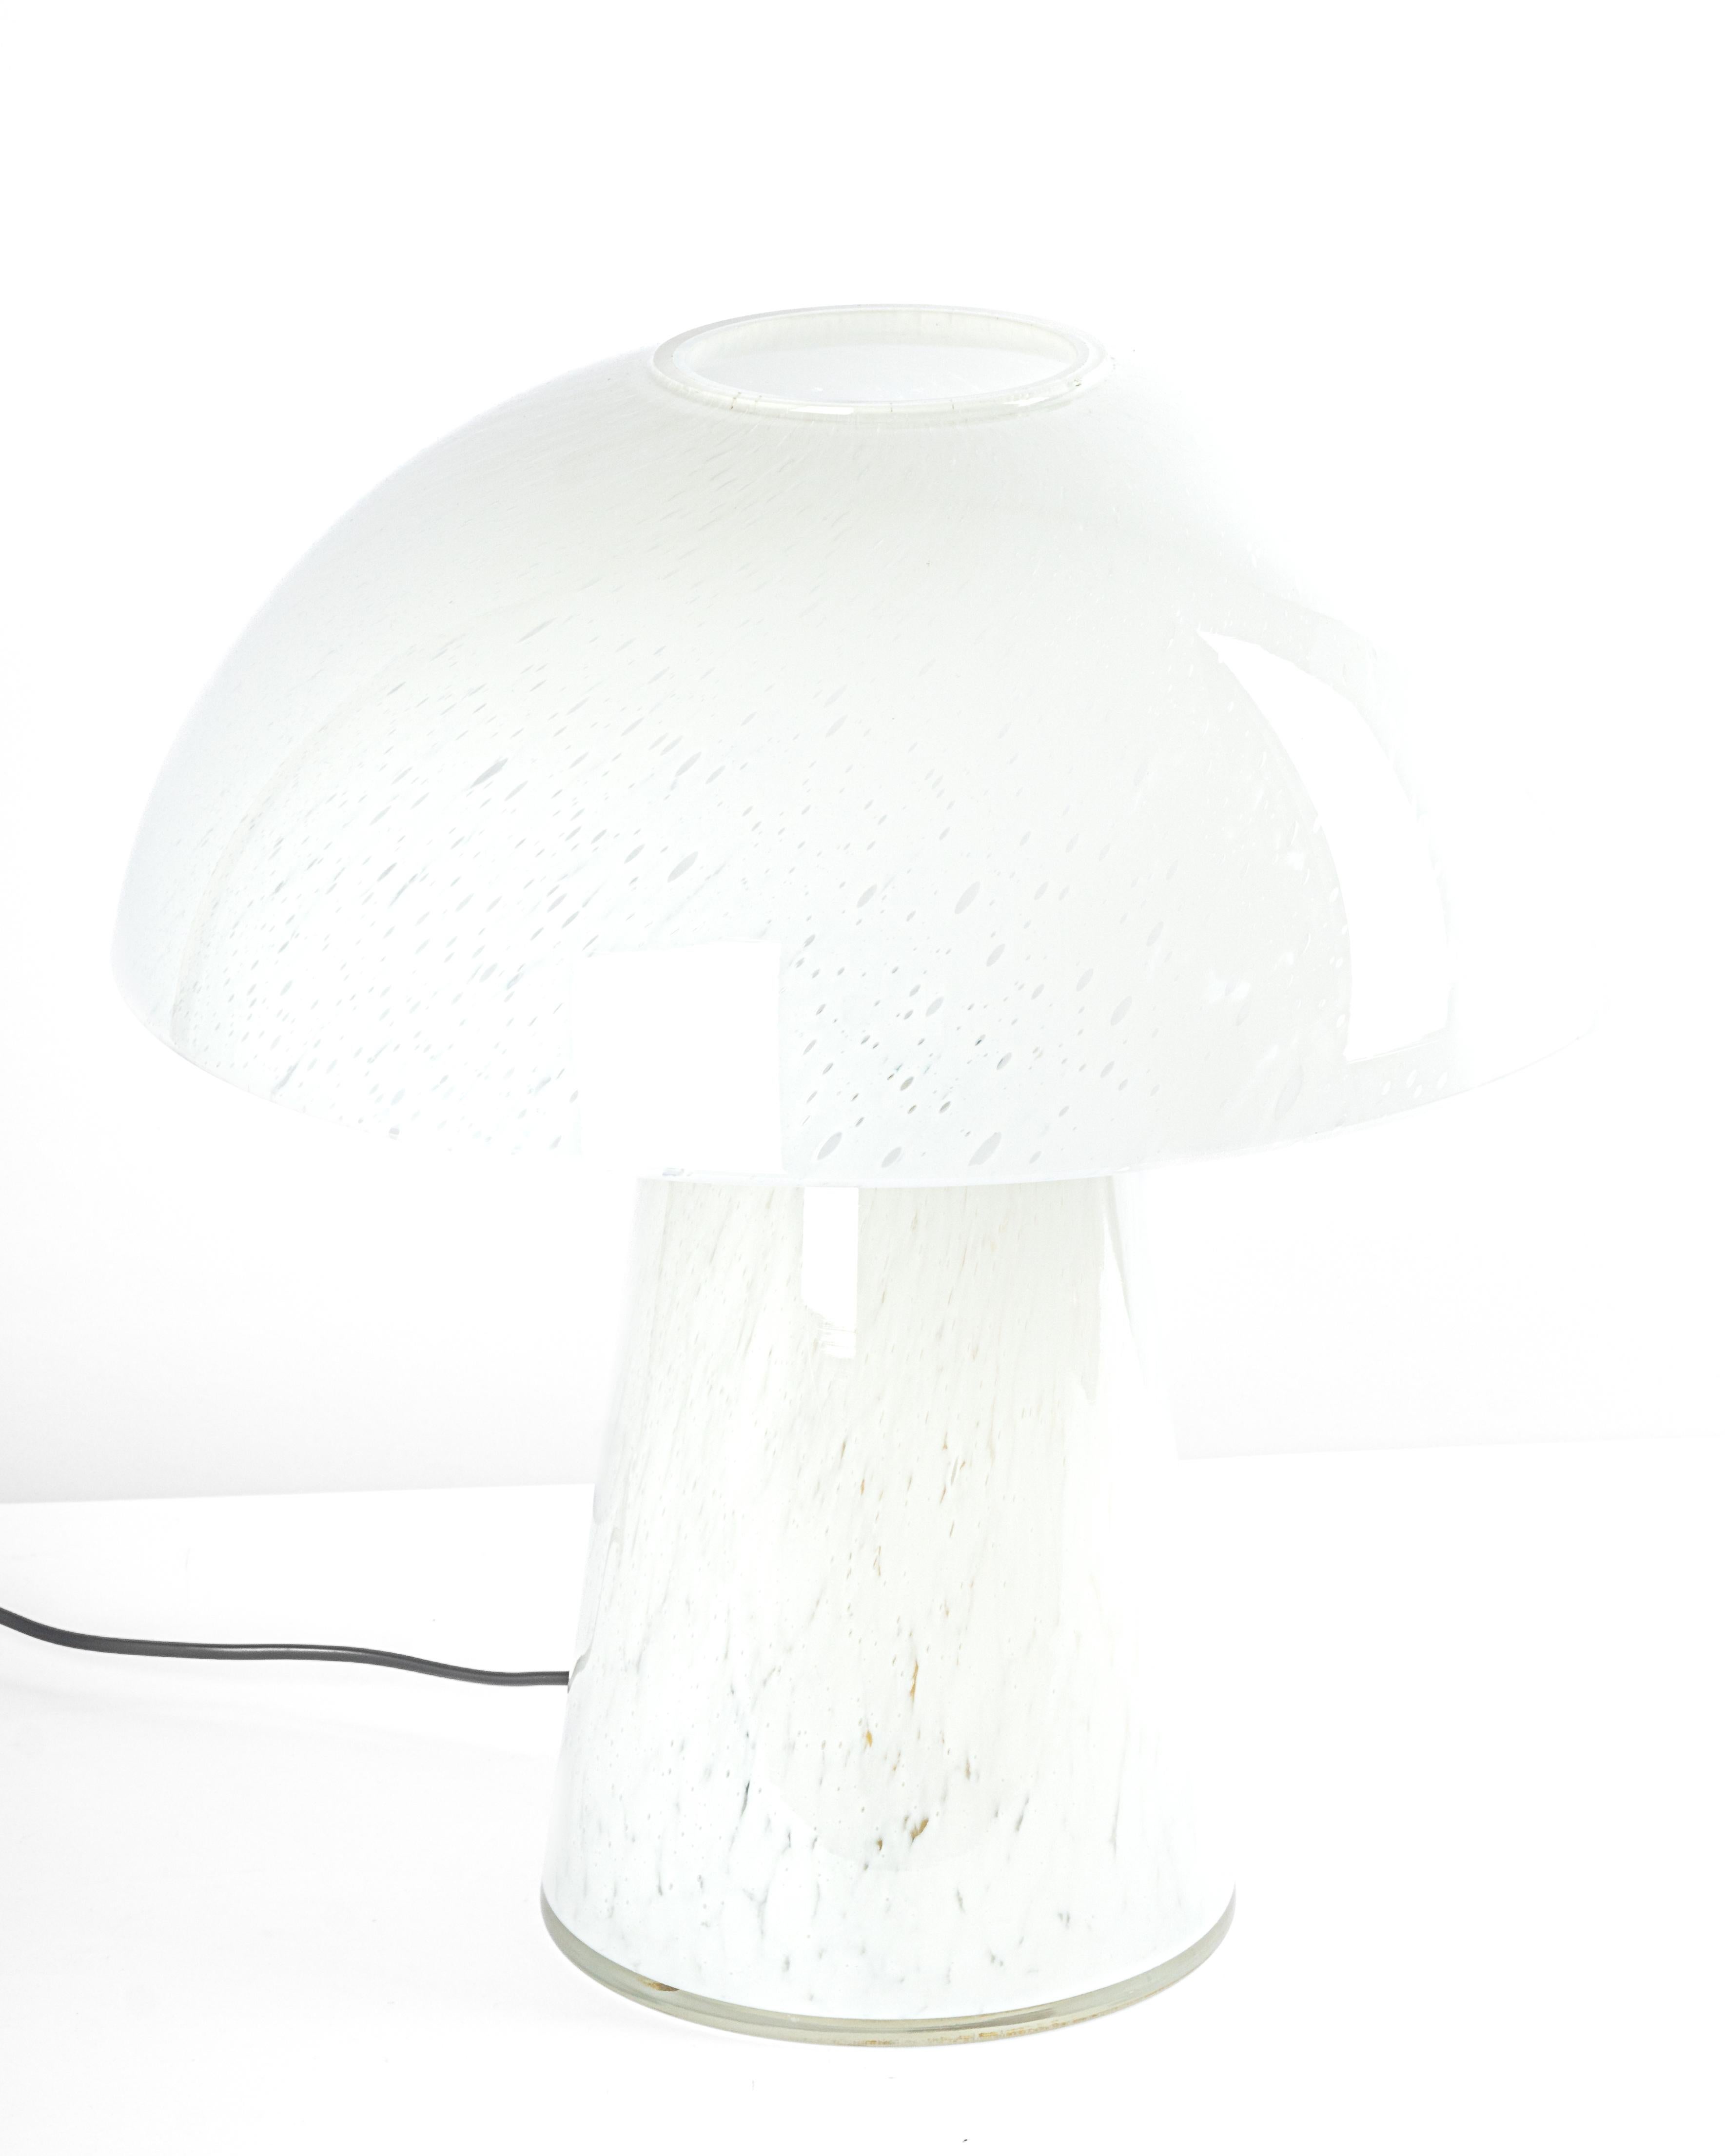 Wonderful mushroom table lamp by Limburg, Germany, 1970s. Made of a single piece.
Great glass body and its edgy quality contrast nicely with the smooth surface and shape of the mushroom. 

Measures: Large table lamp
Height 47 cm // 18.5